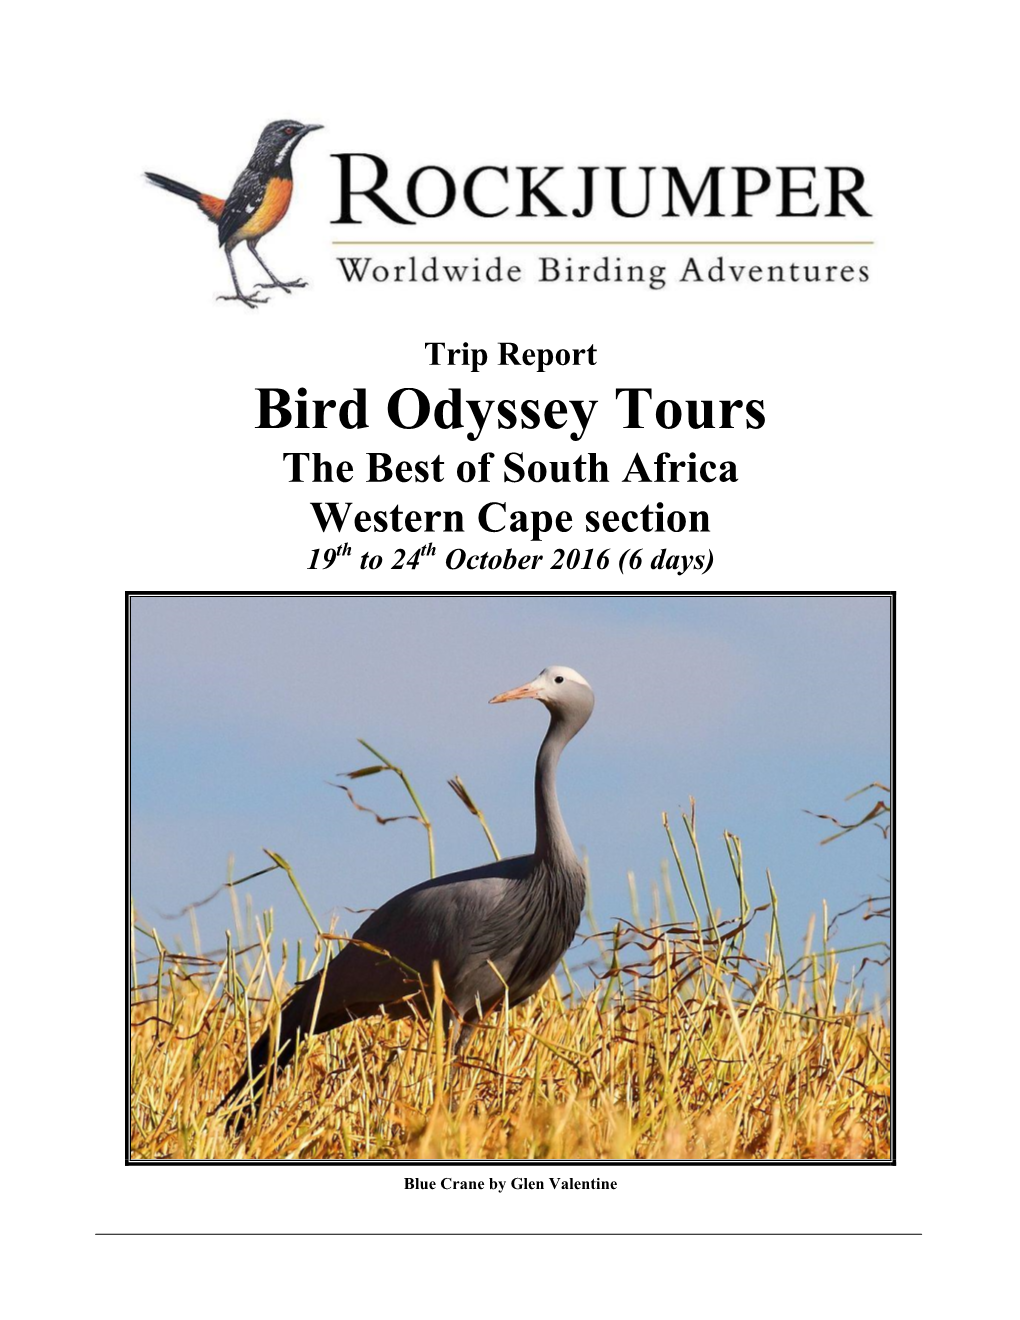 Trip Report Bird Odyssey Tours the Best of South Africa Western Cape Section 19Th to 24Th October 2016 (6 Days)